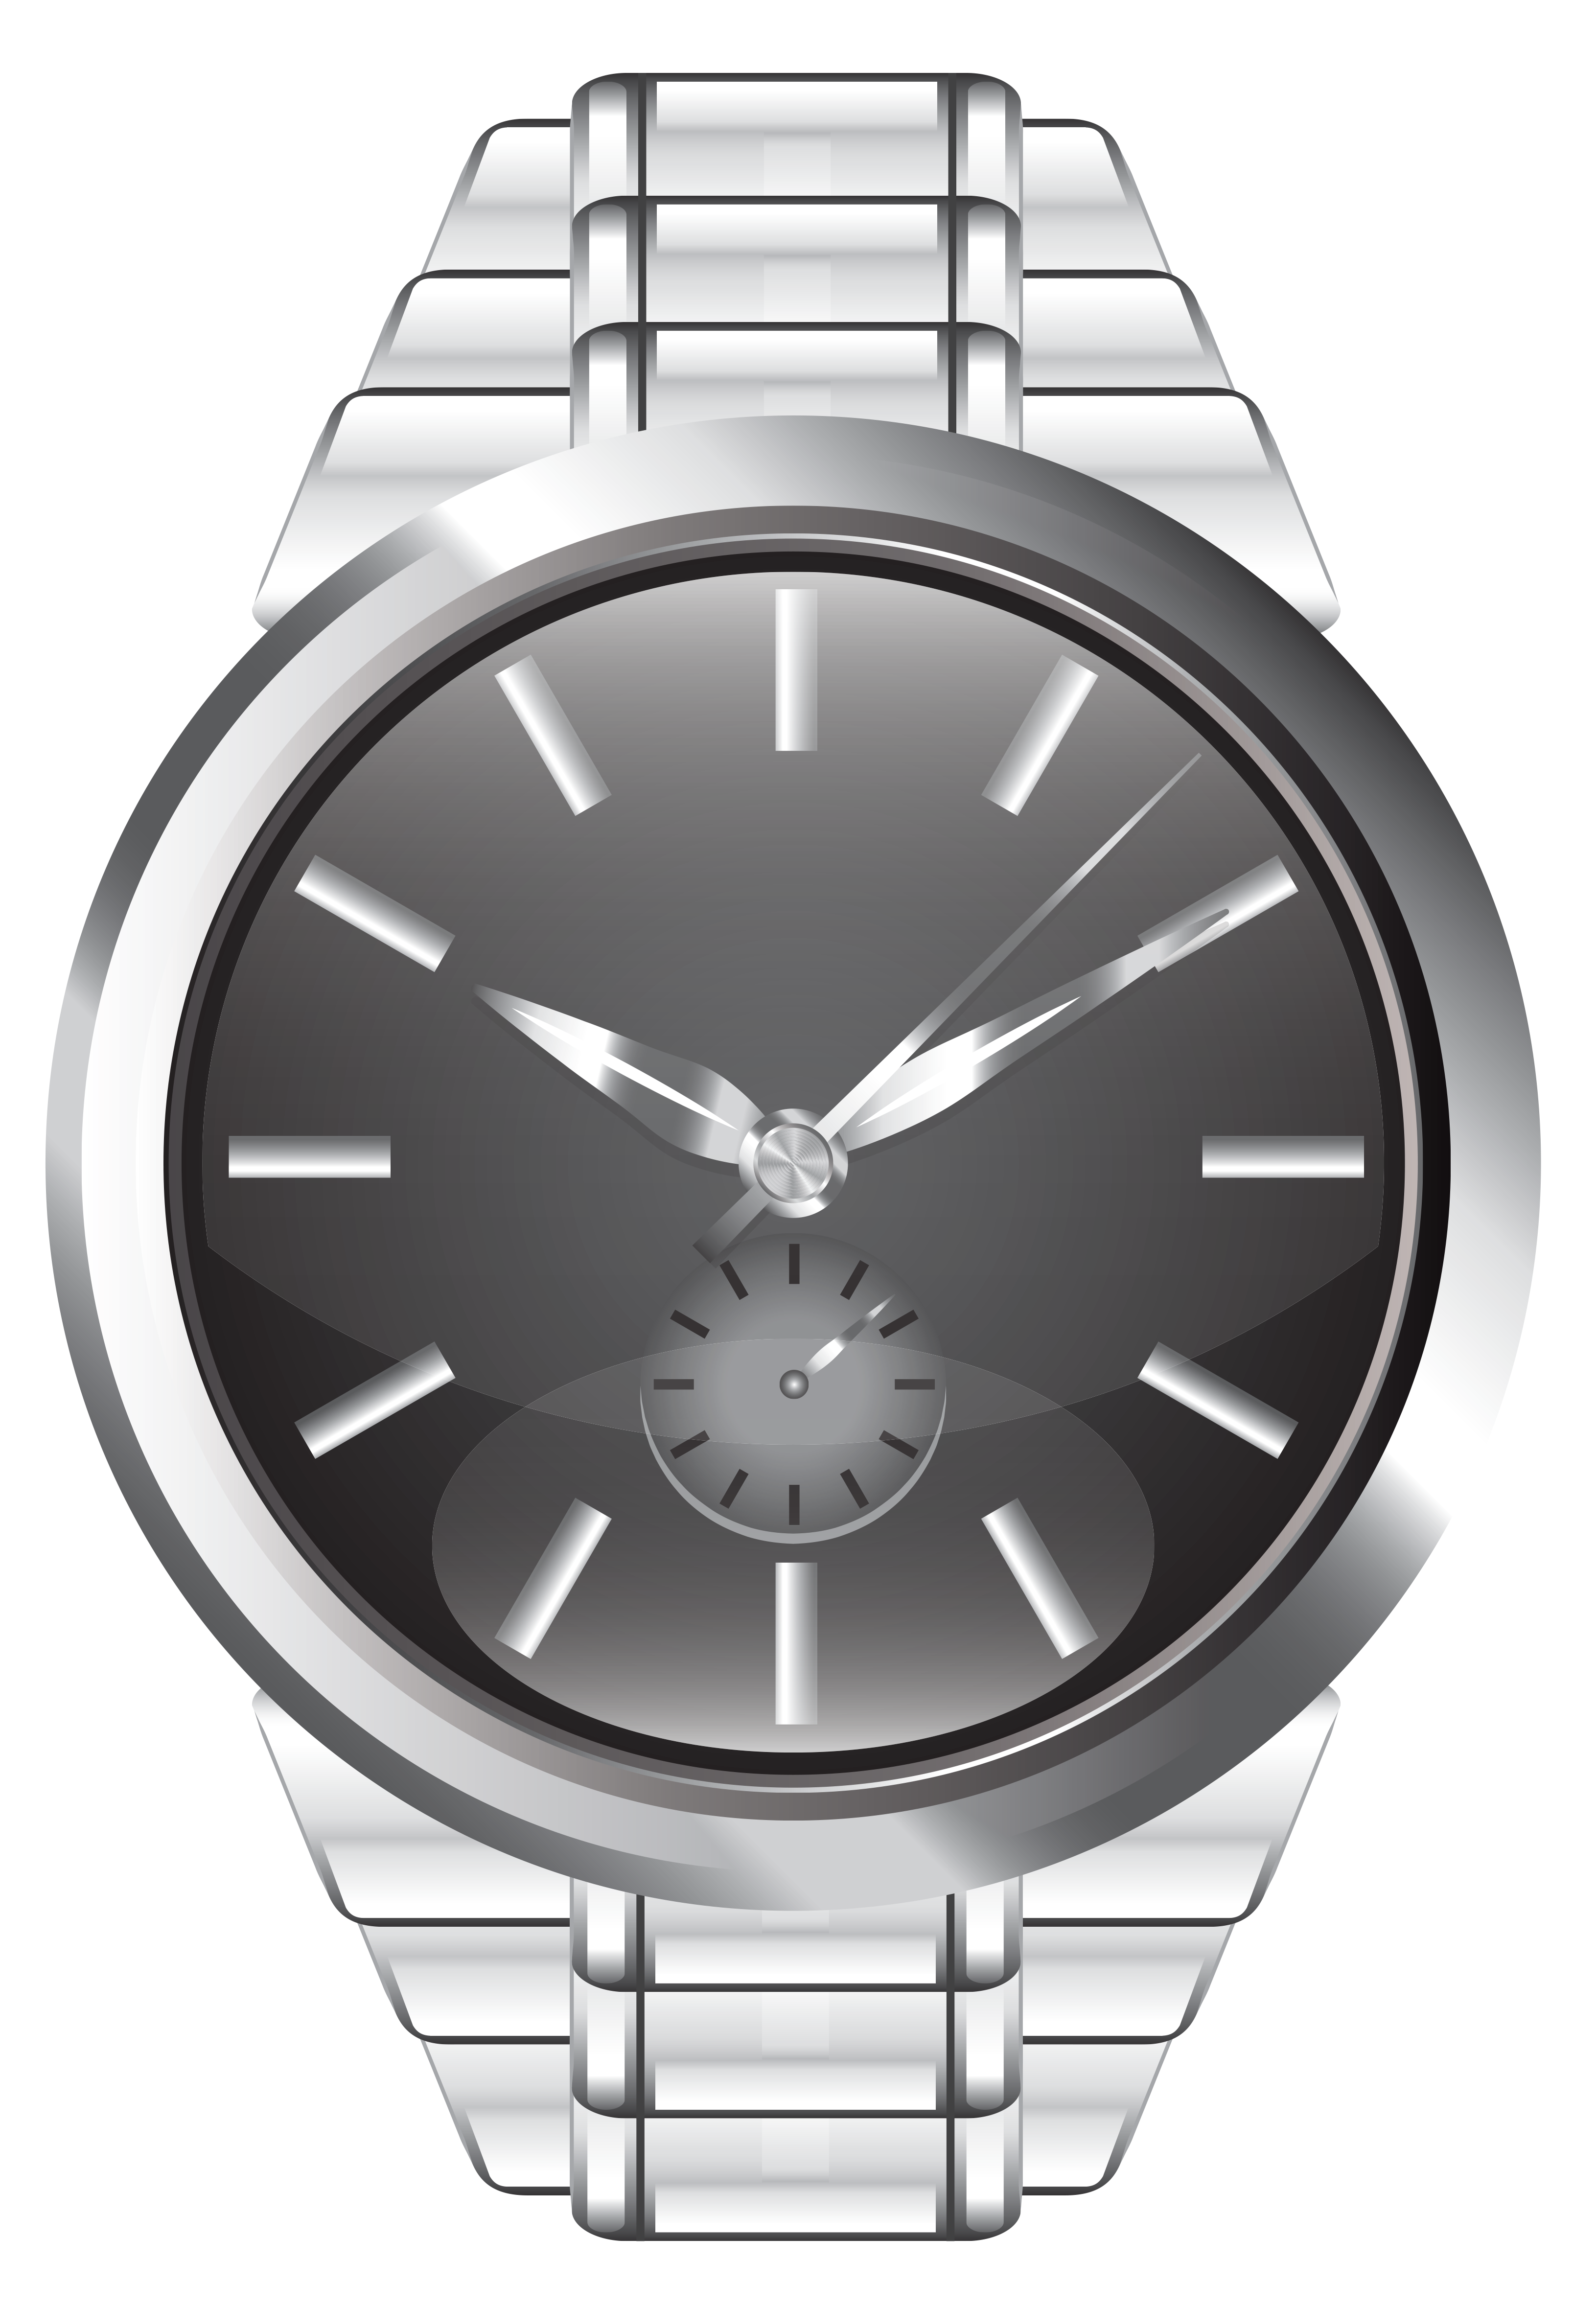 clipart picture of a watch - photo #38